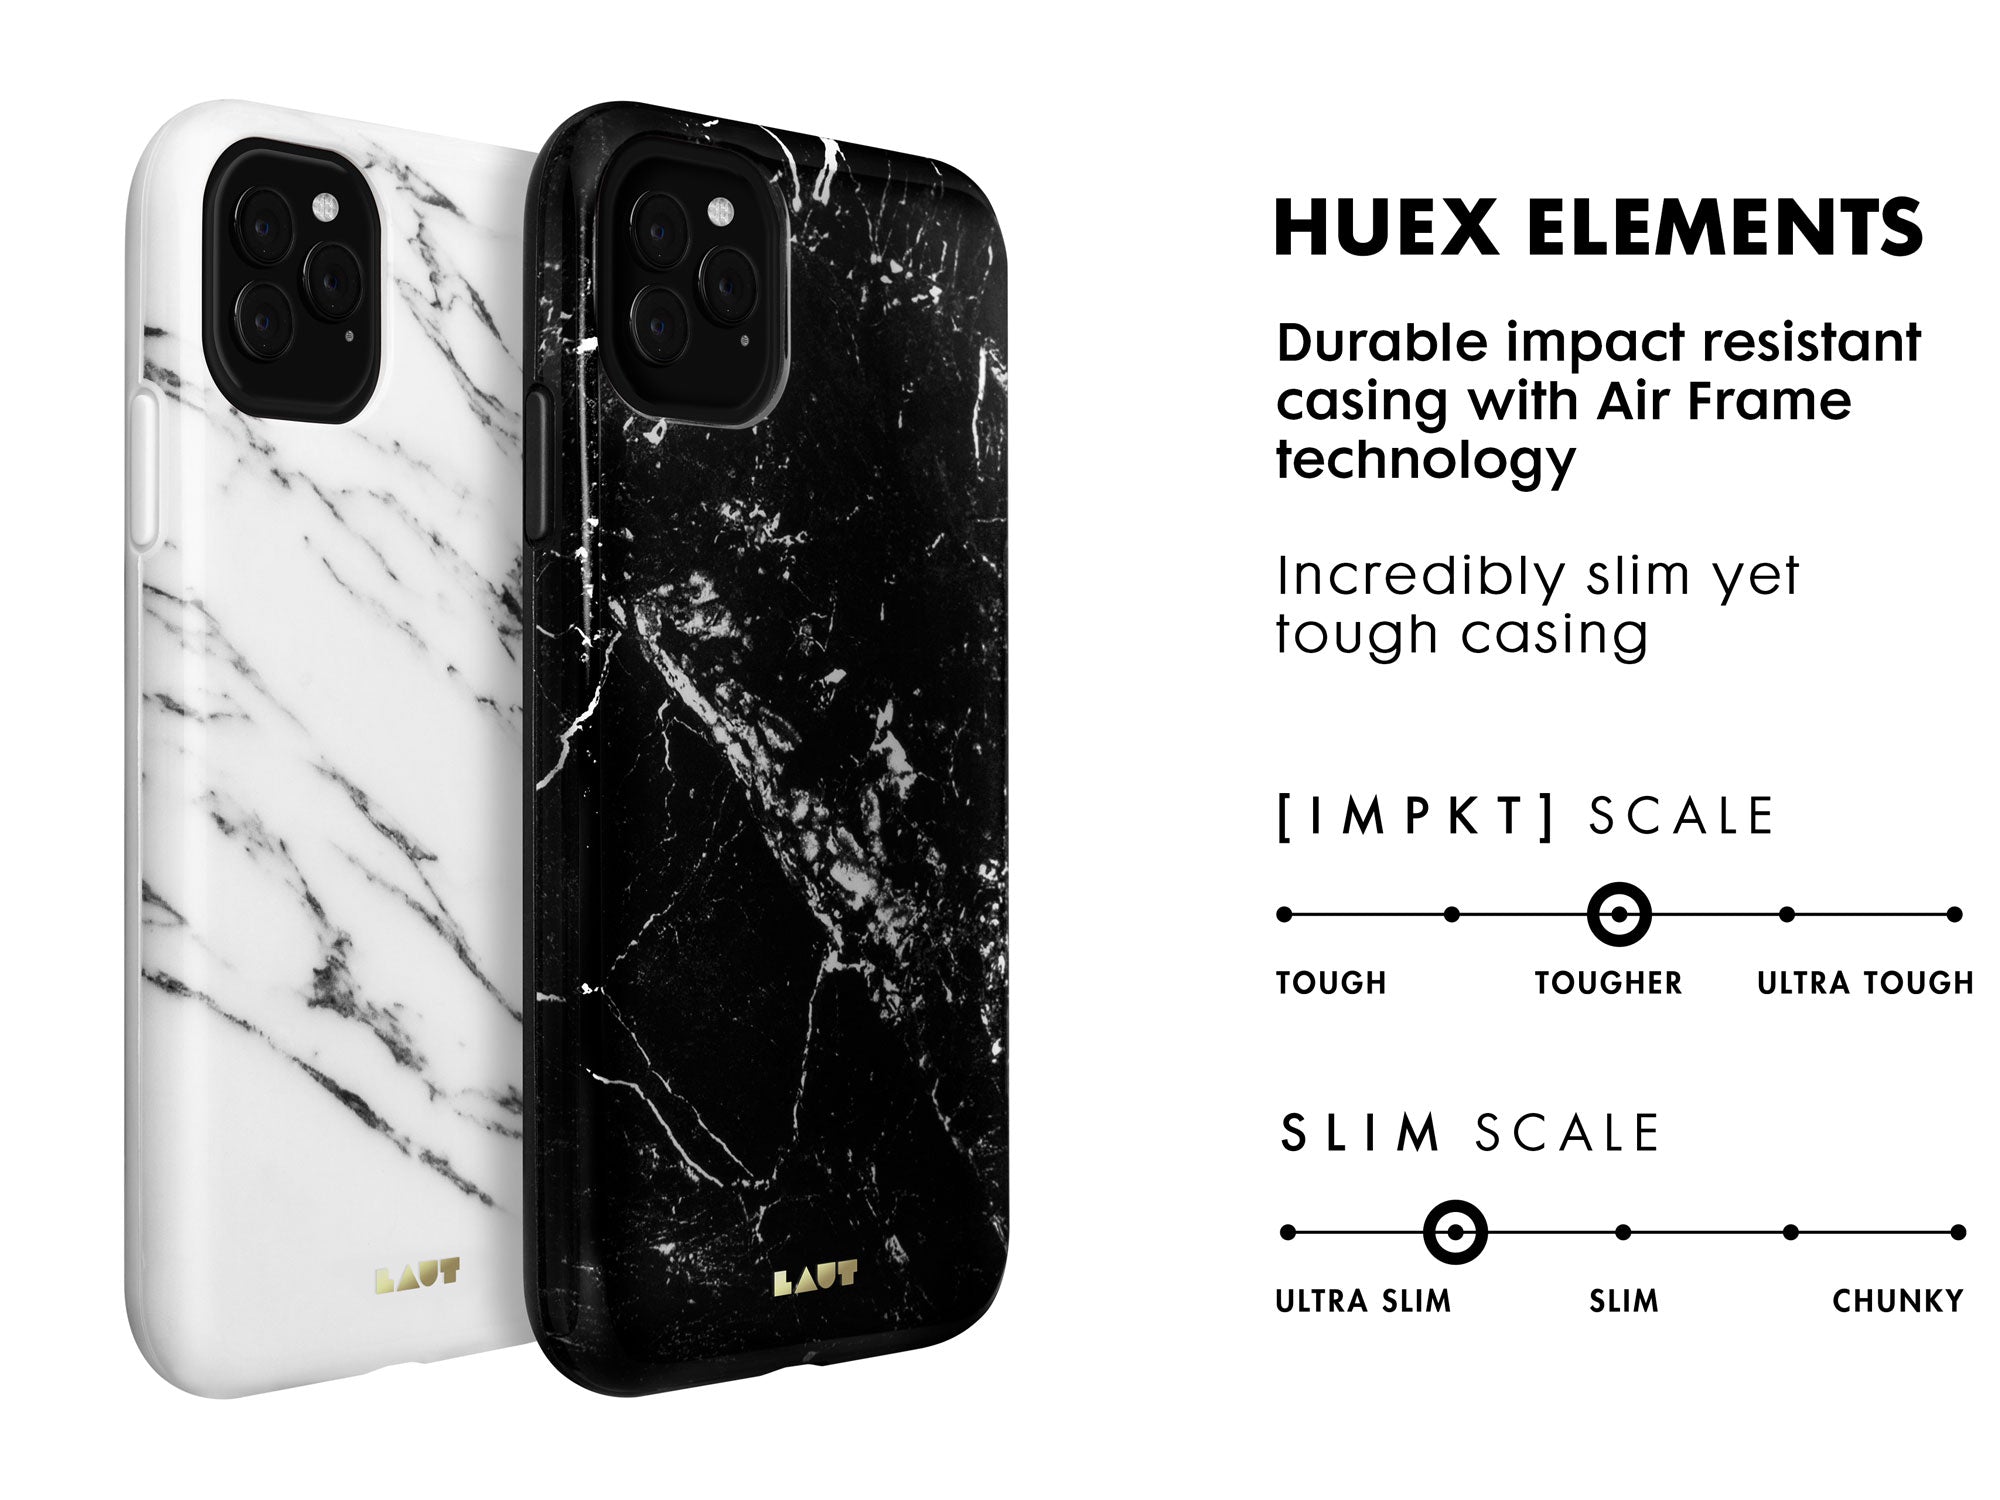 HUEX ELEMENTS for iPhone 11 series